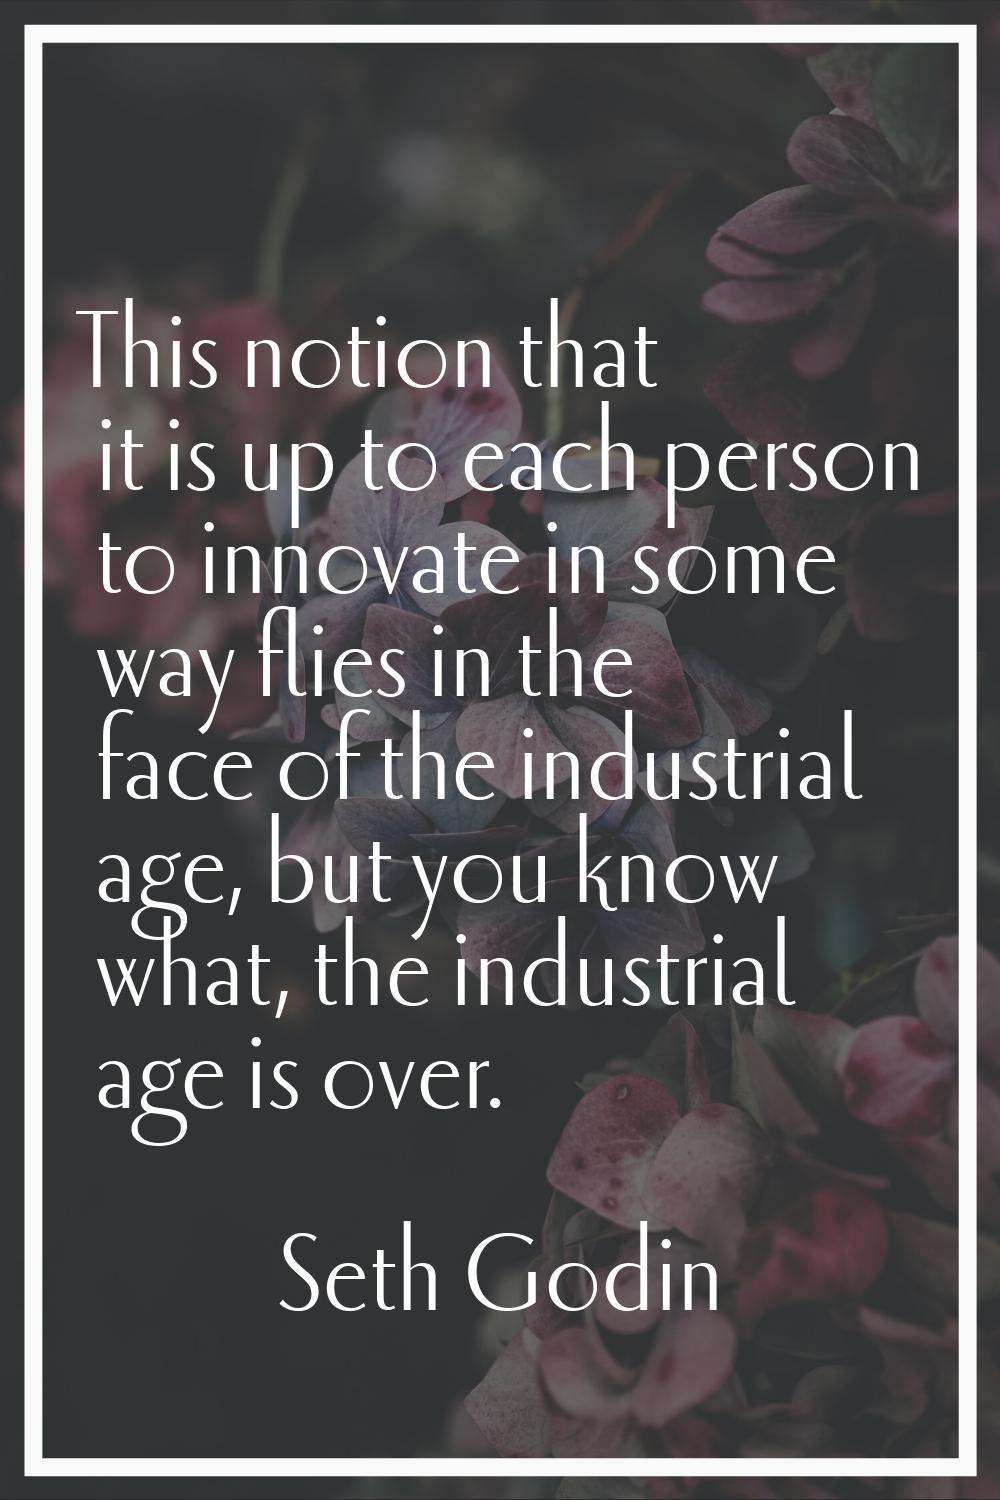 This notion that it is up to each person to innovate in some way flies in the face of the industria